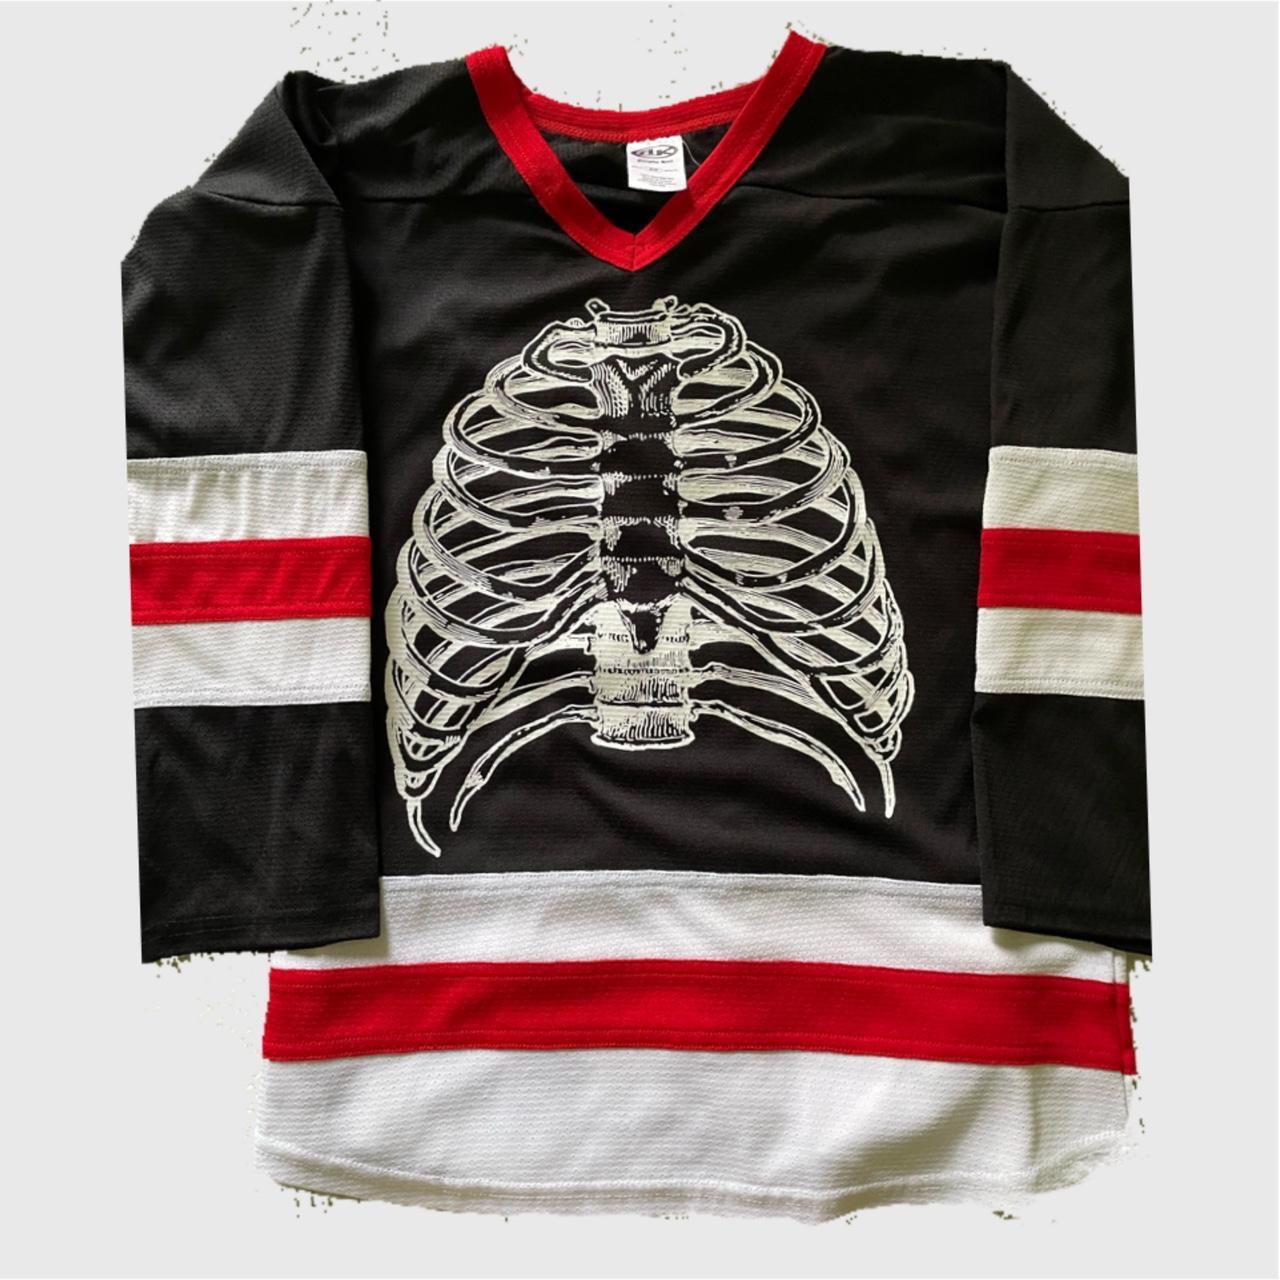 Product Image 1 - pleasures hockey jersey
size: small, fits